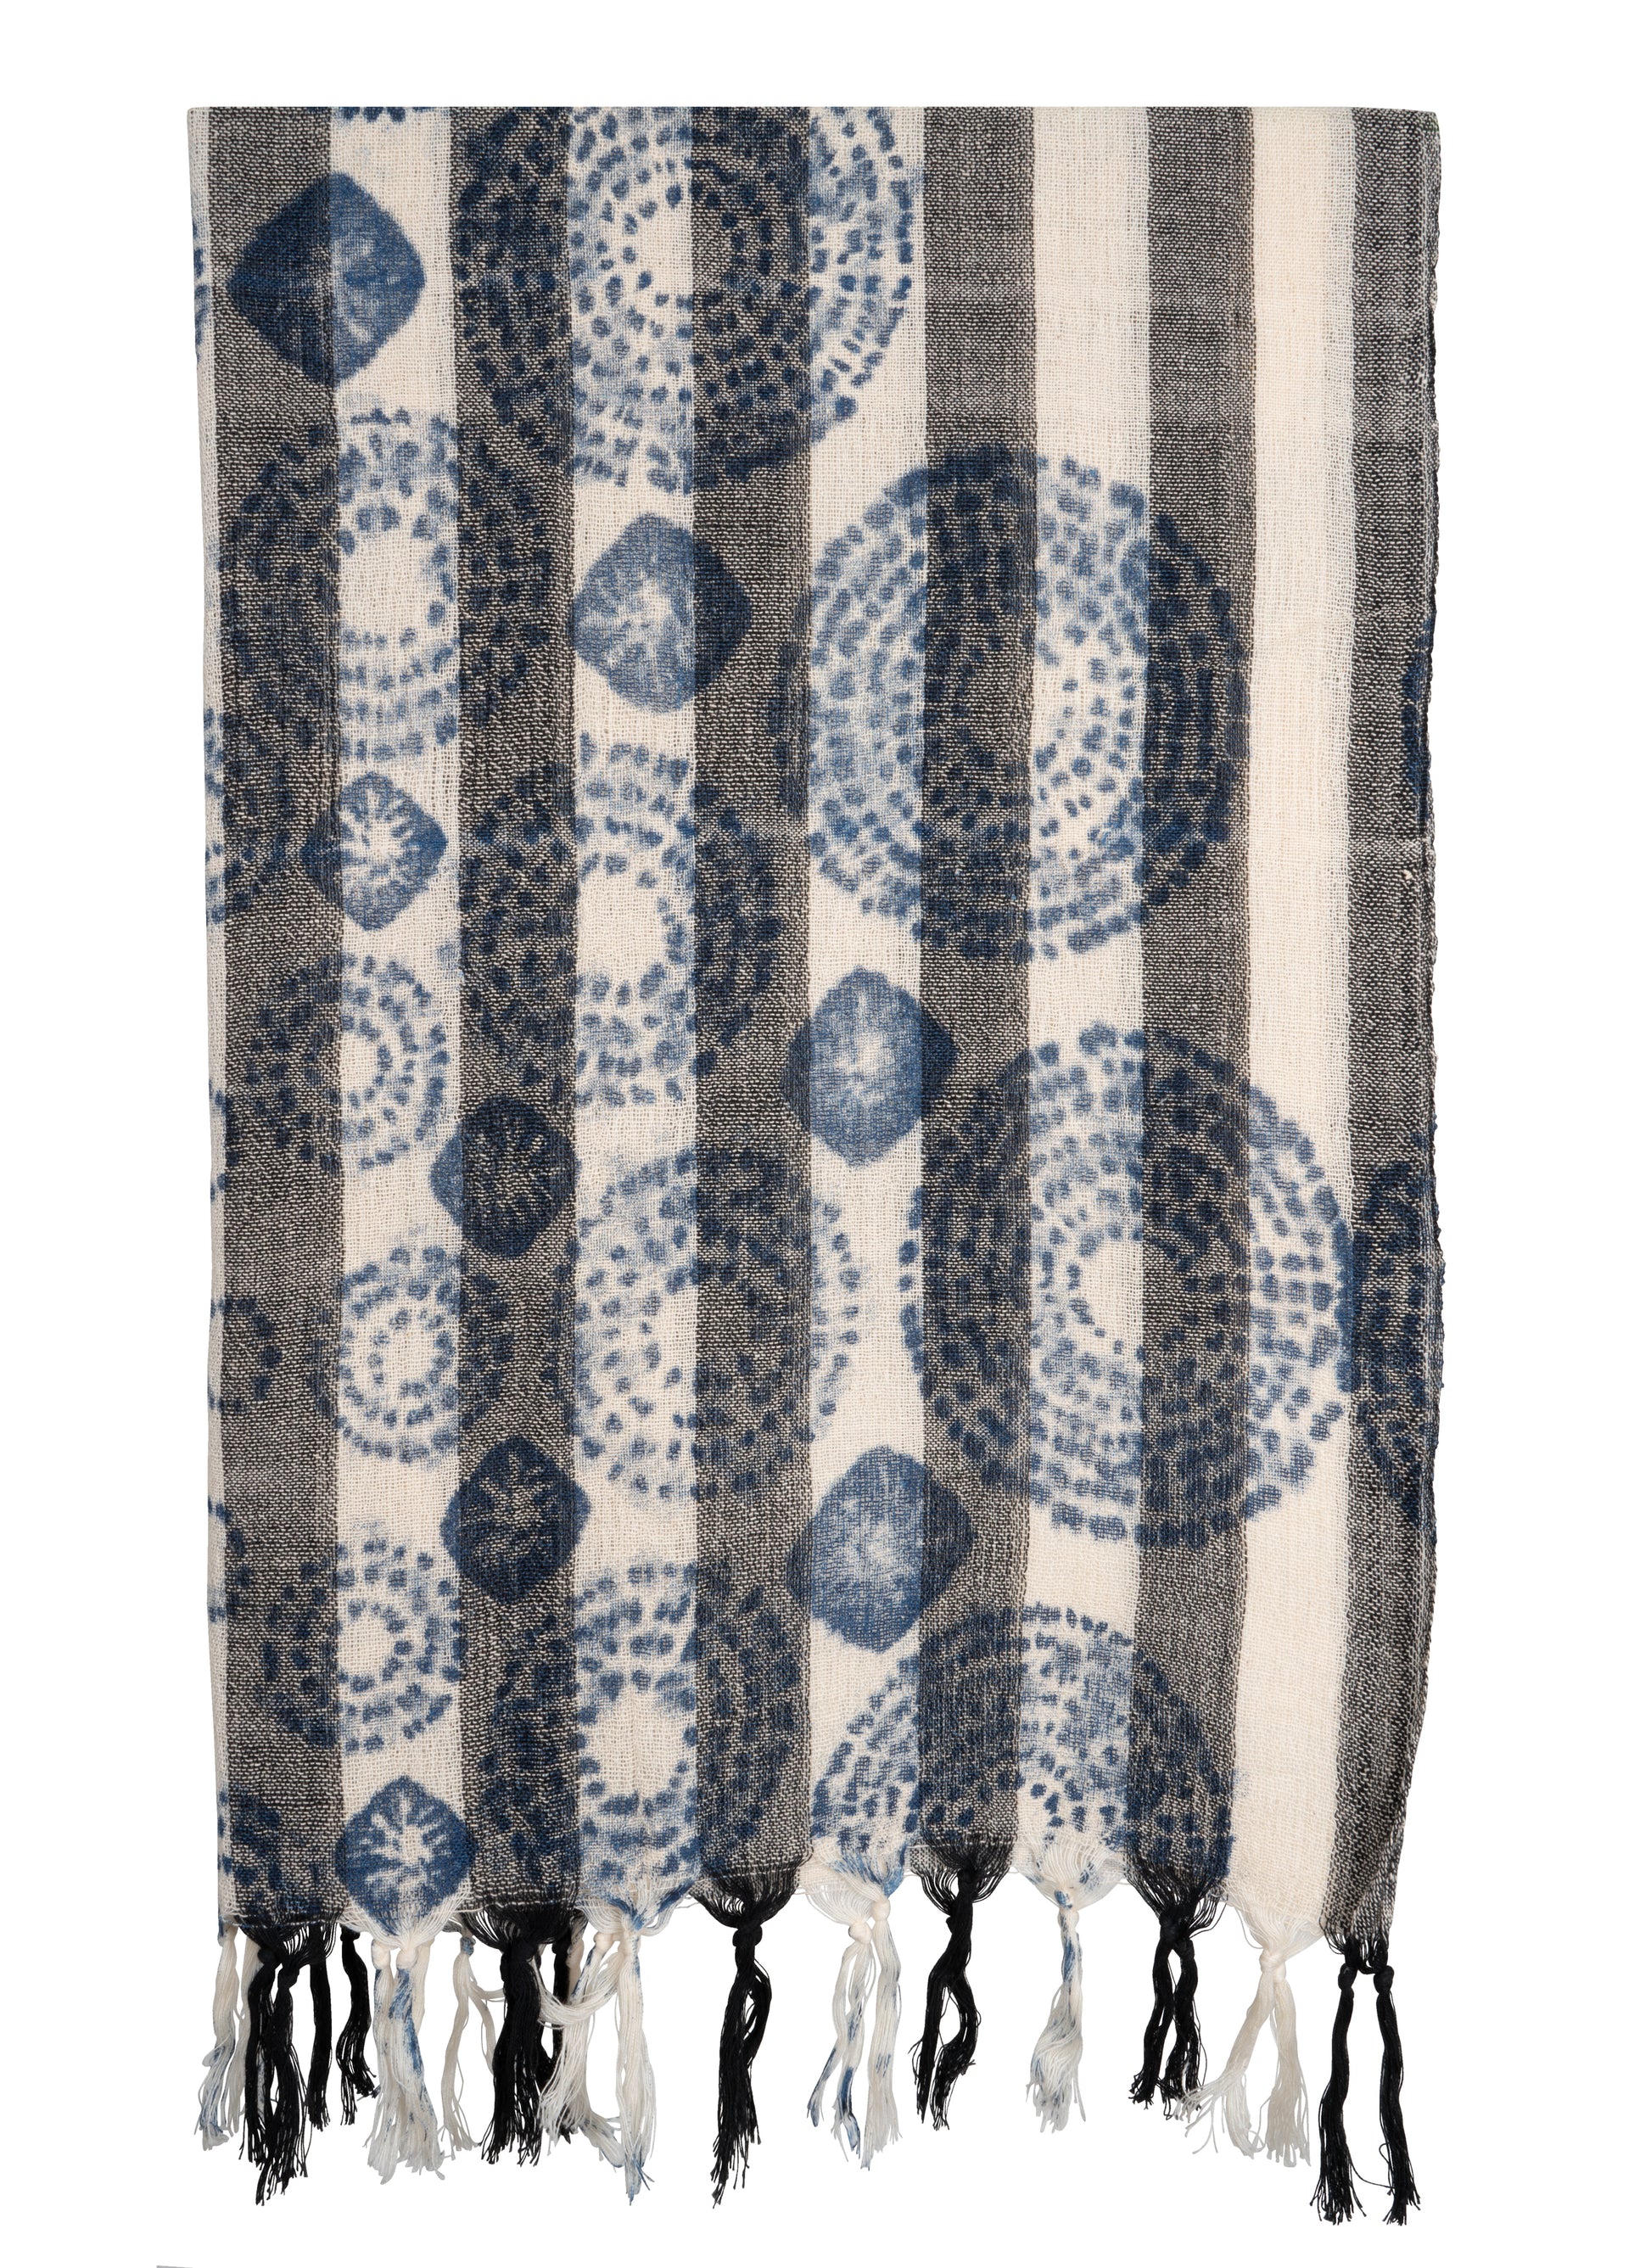 black and white flower Handspun Handwoven Cotton Scarf & Shawls Patterned - CCCollections